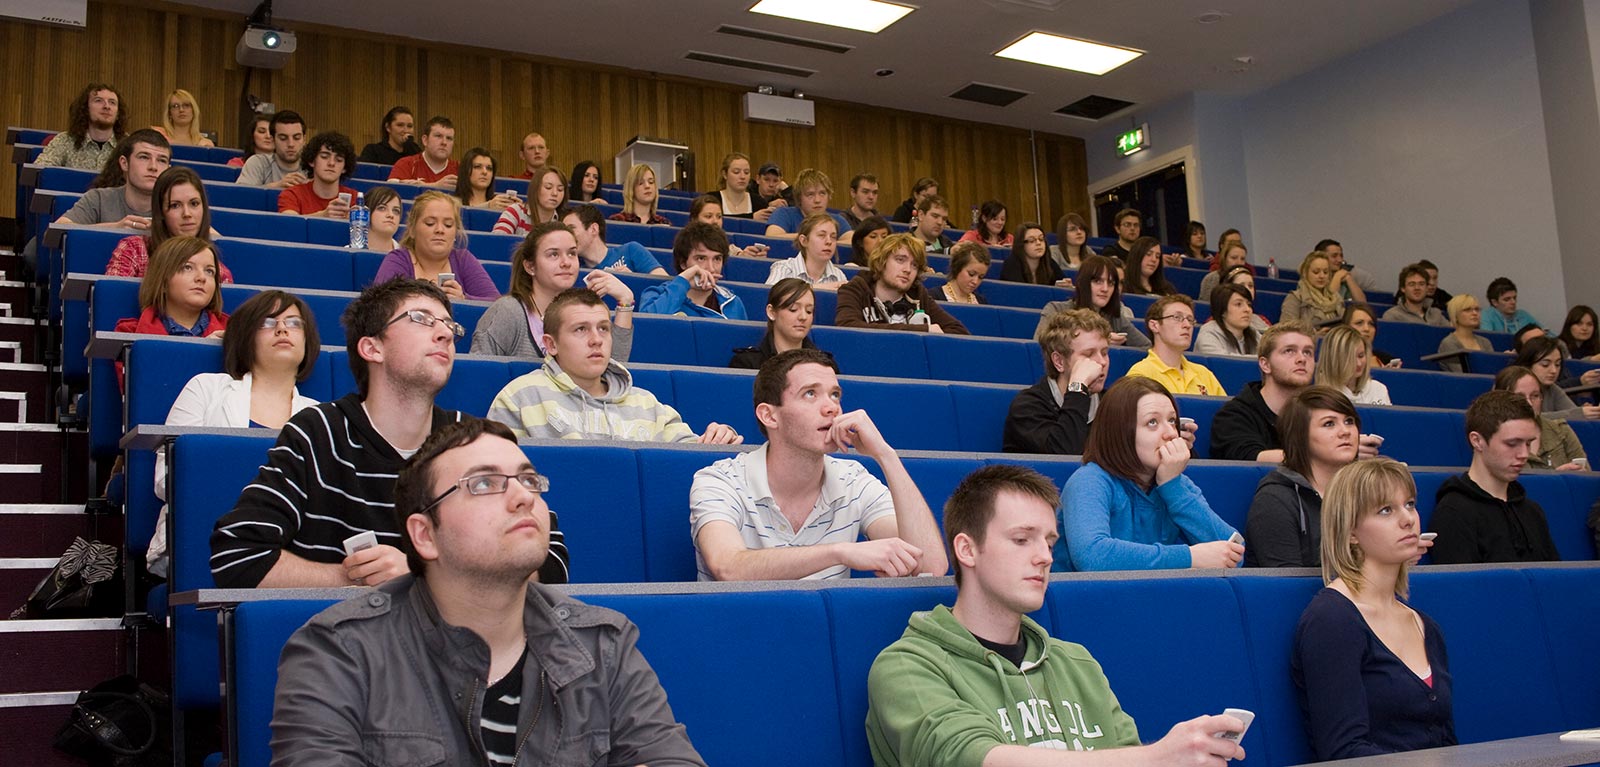 Lecture theatre filled with students